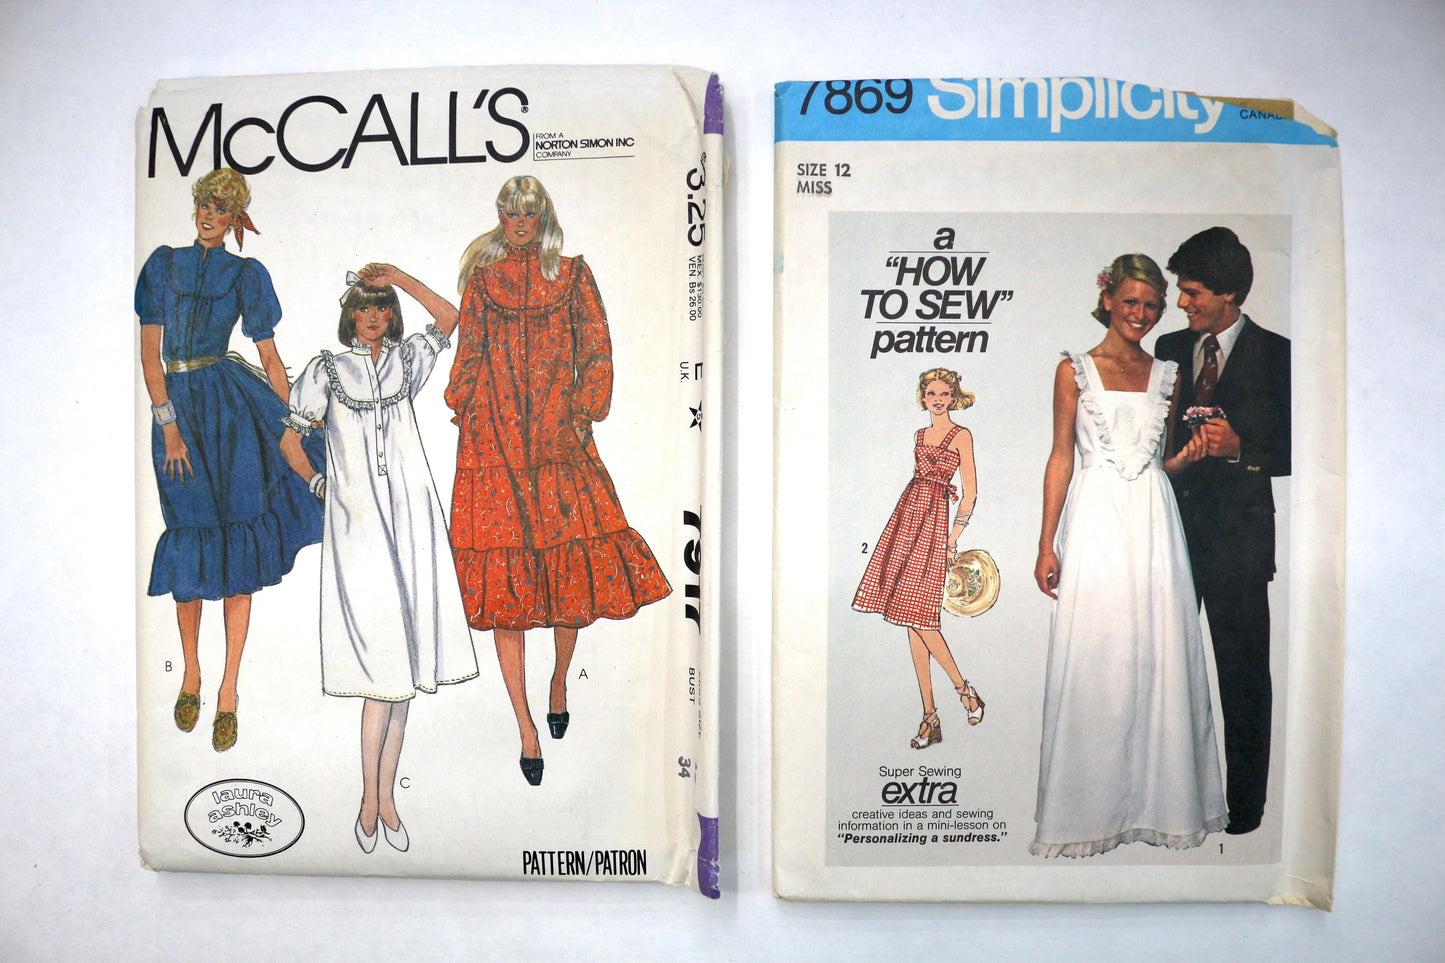 McCalls 7917 Sewing Pattern or Simplicity 7869 Sewing Pattern